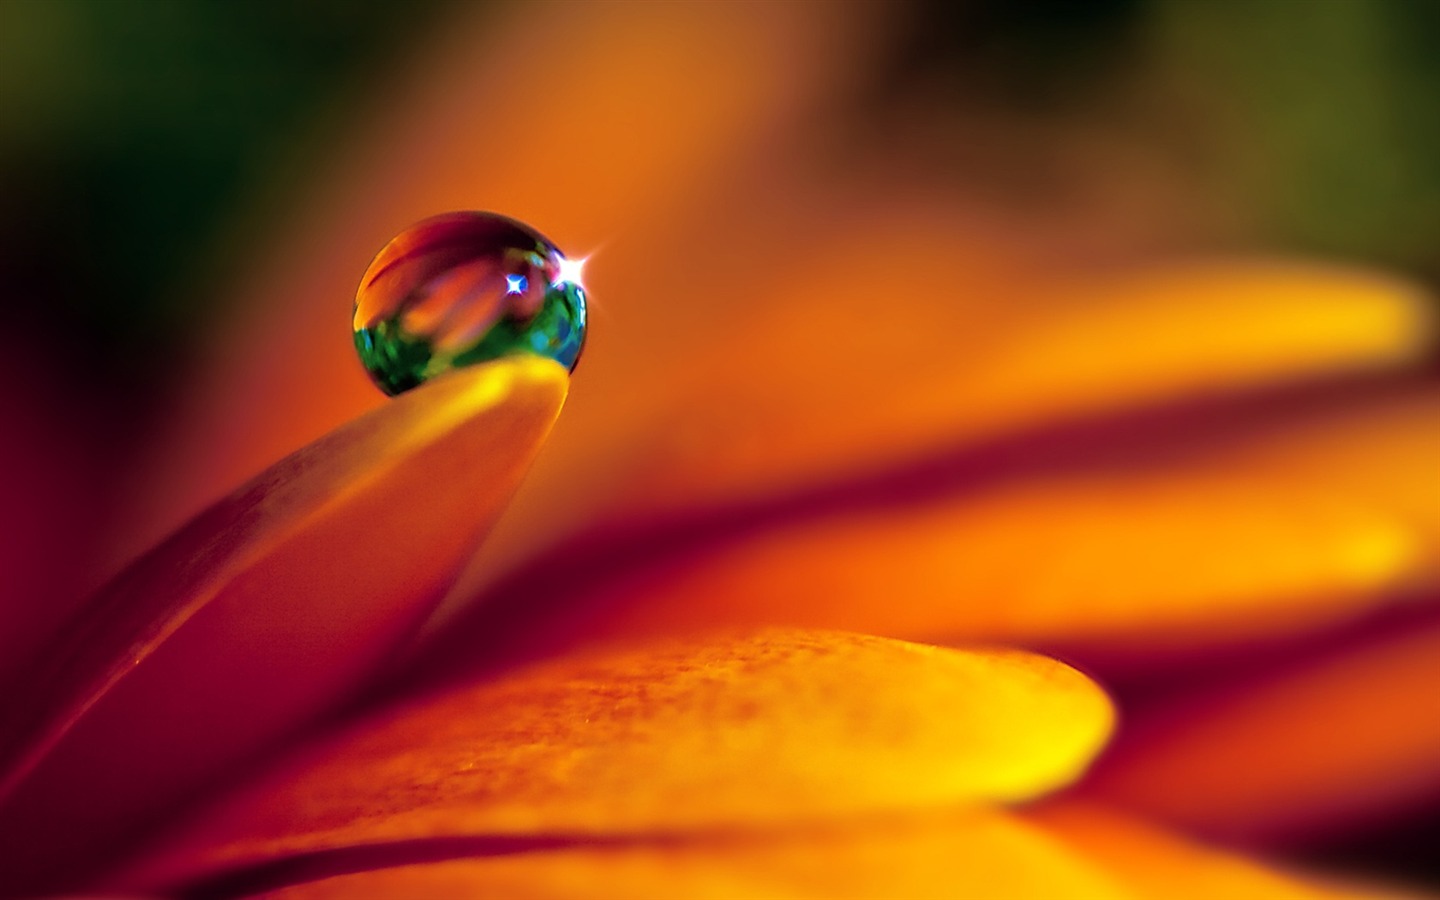 HD wallpaper flowers and drops of water #1 - 1440x900